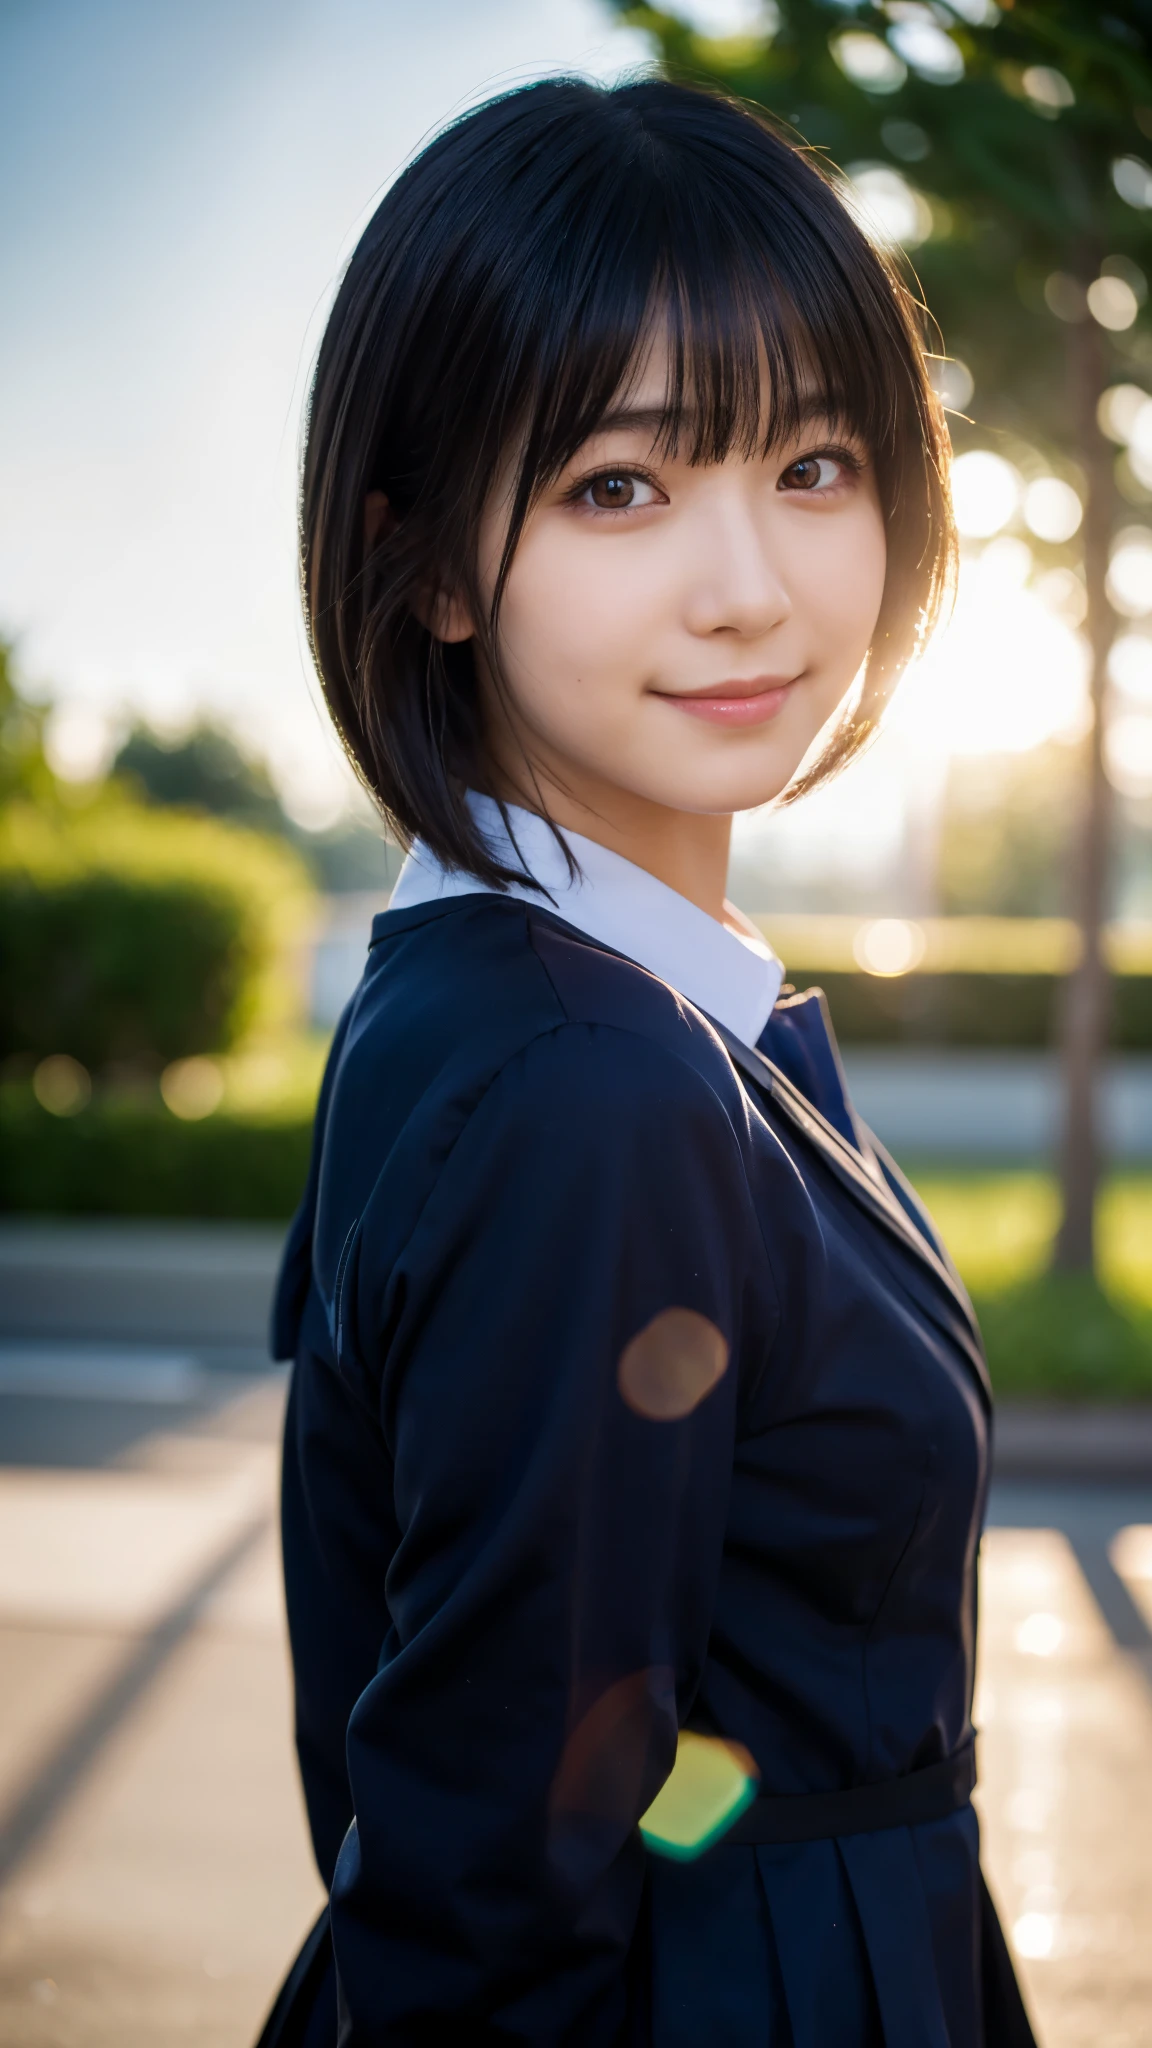 (highest quality,masterpiece:1.3,ultra high resolution),(Super detailed,caustics,8k),(photorealistic:1.4,RAW shooting),1 girl,face forward,18-year-old,cute,Japanese,black short bob,(school uniform),(smile),(stare at the camera),morning,blue sky,sun,Natural light,school playground,(front shot),(bust up shot),(Backlight),Lens flare